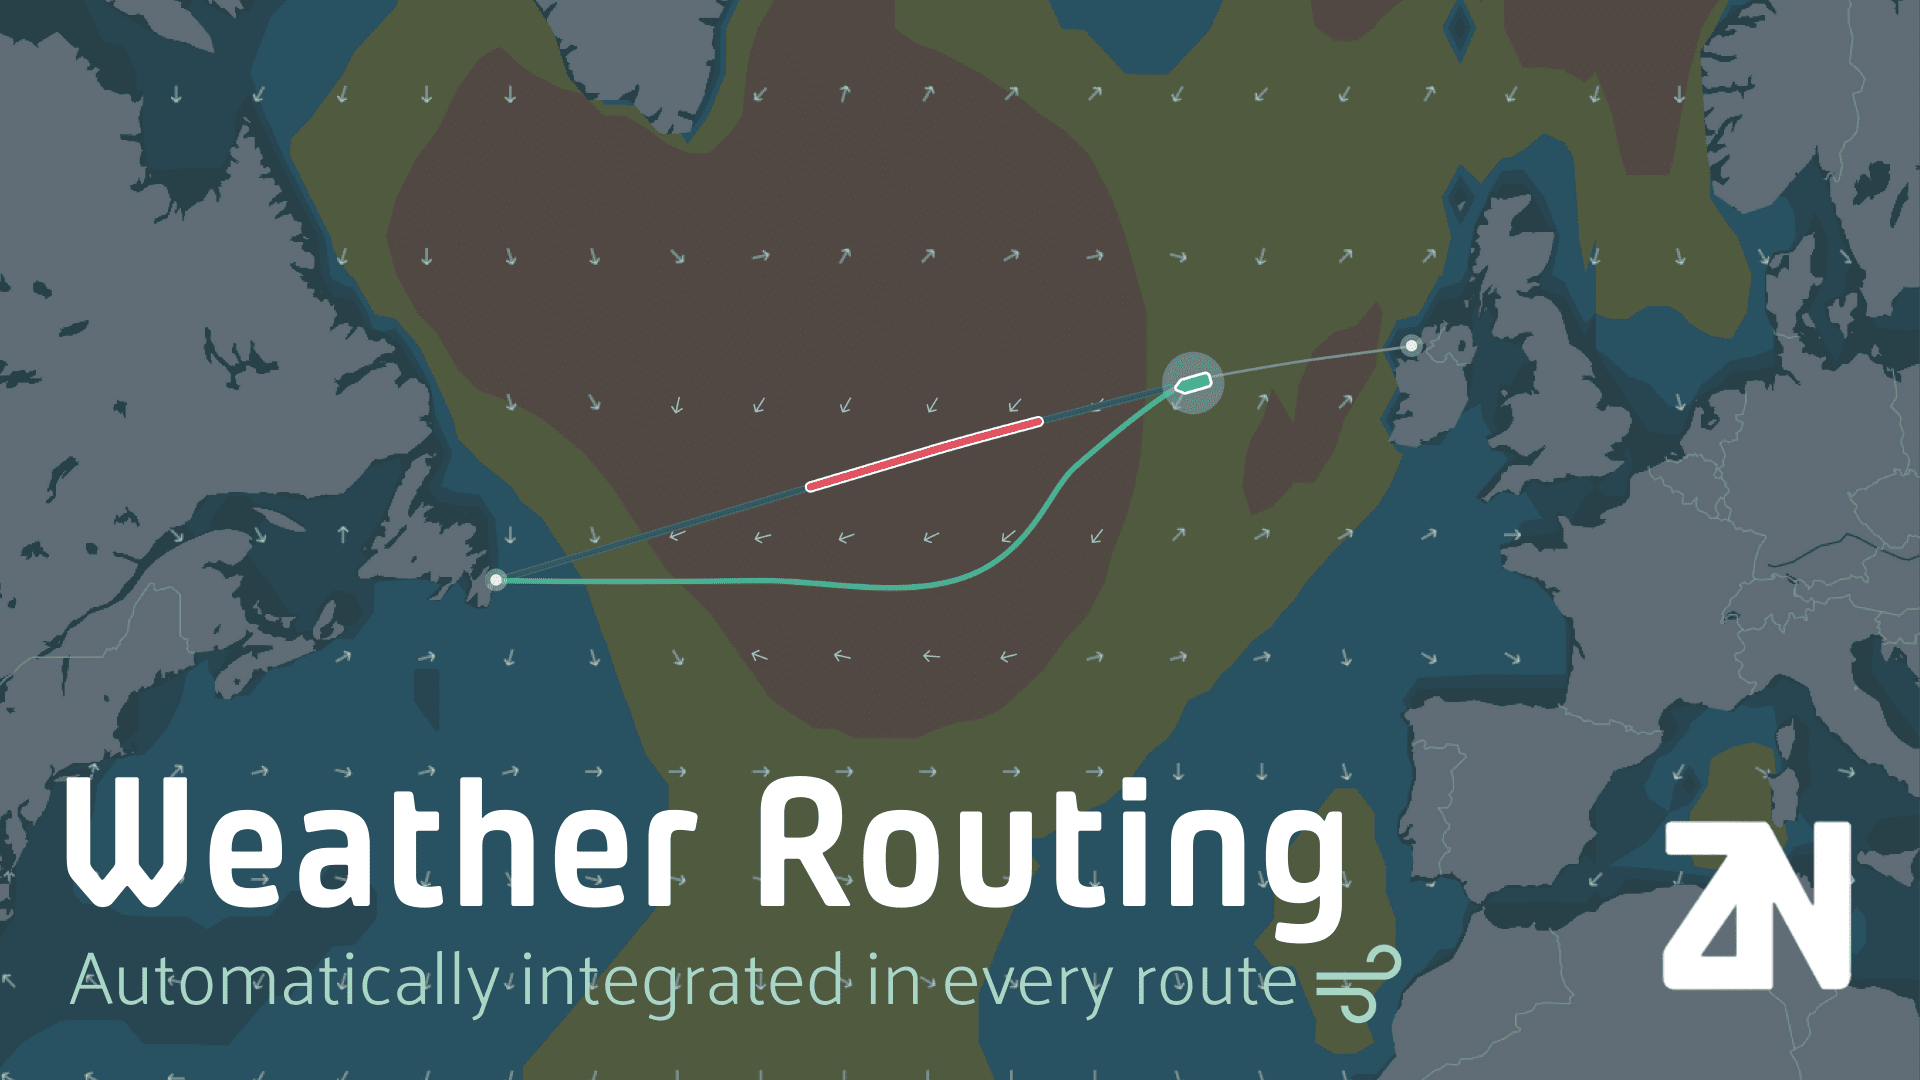 Integrated weather routing empowers shipping industry to place weather at the heart of commercial decision-making, says ZeroNorth